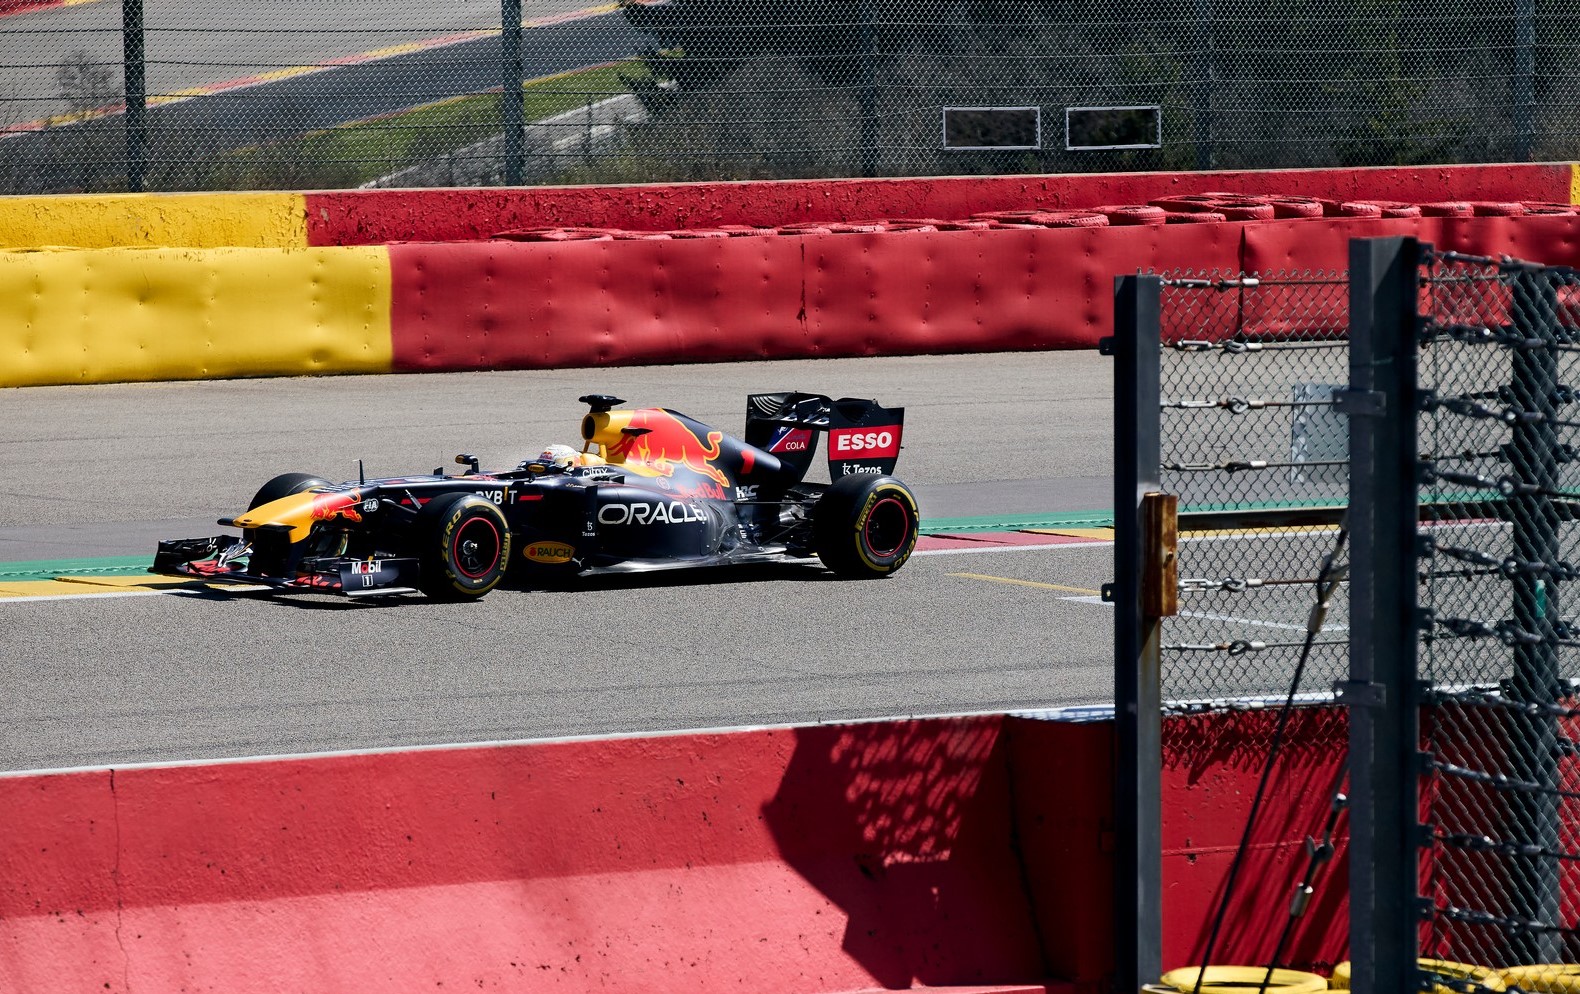 Max Verstappen marks the first F1 driver to test at the revamped Spa circuit